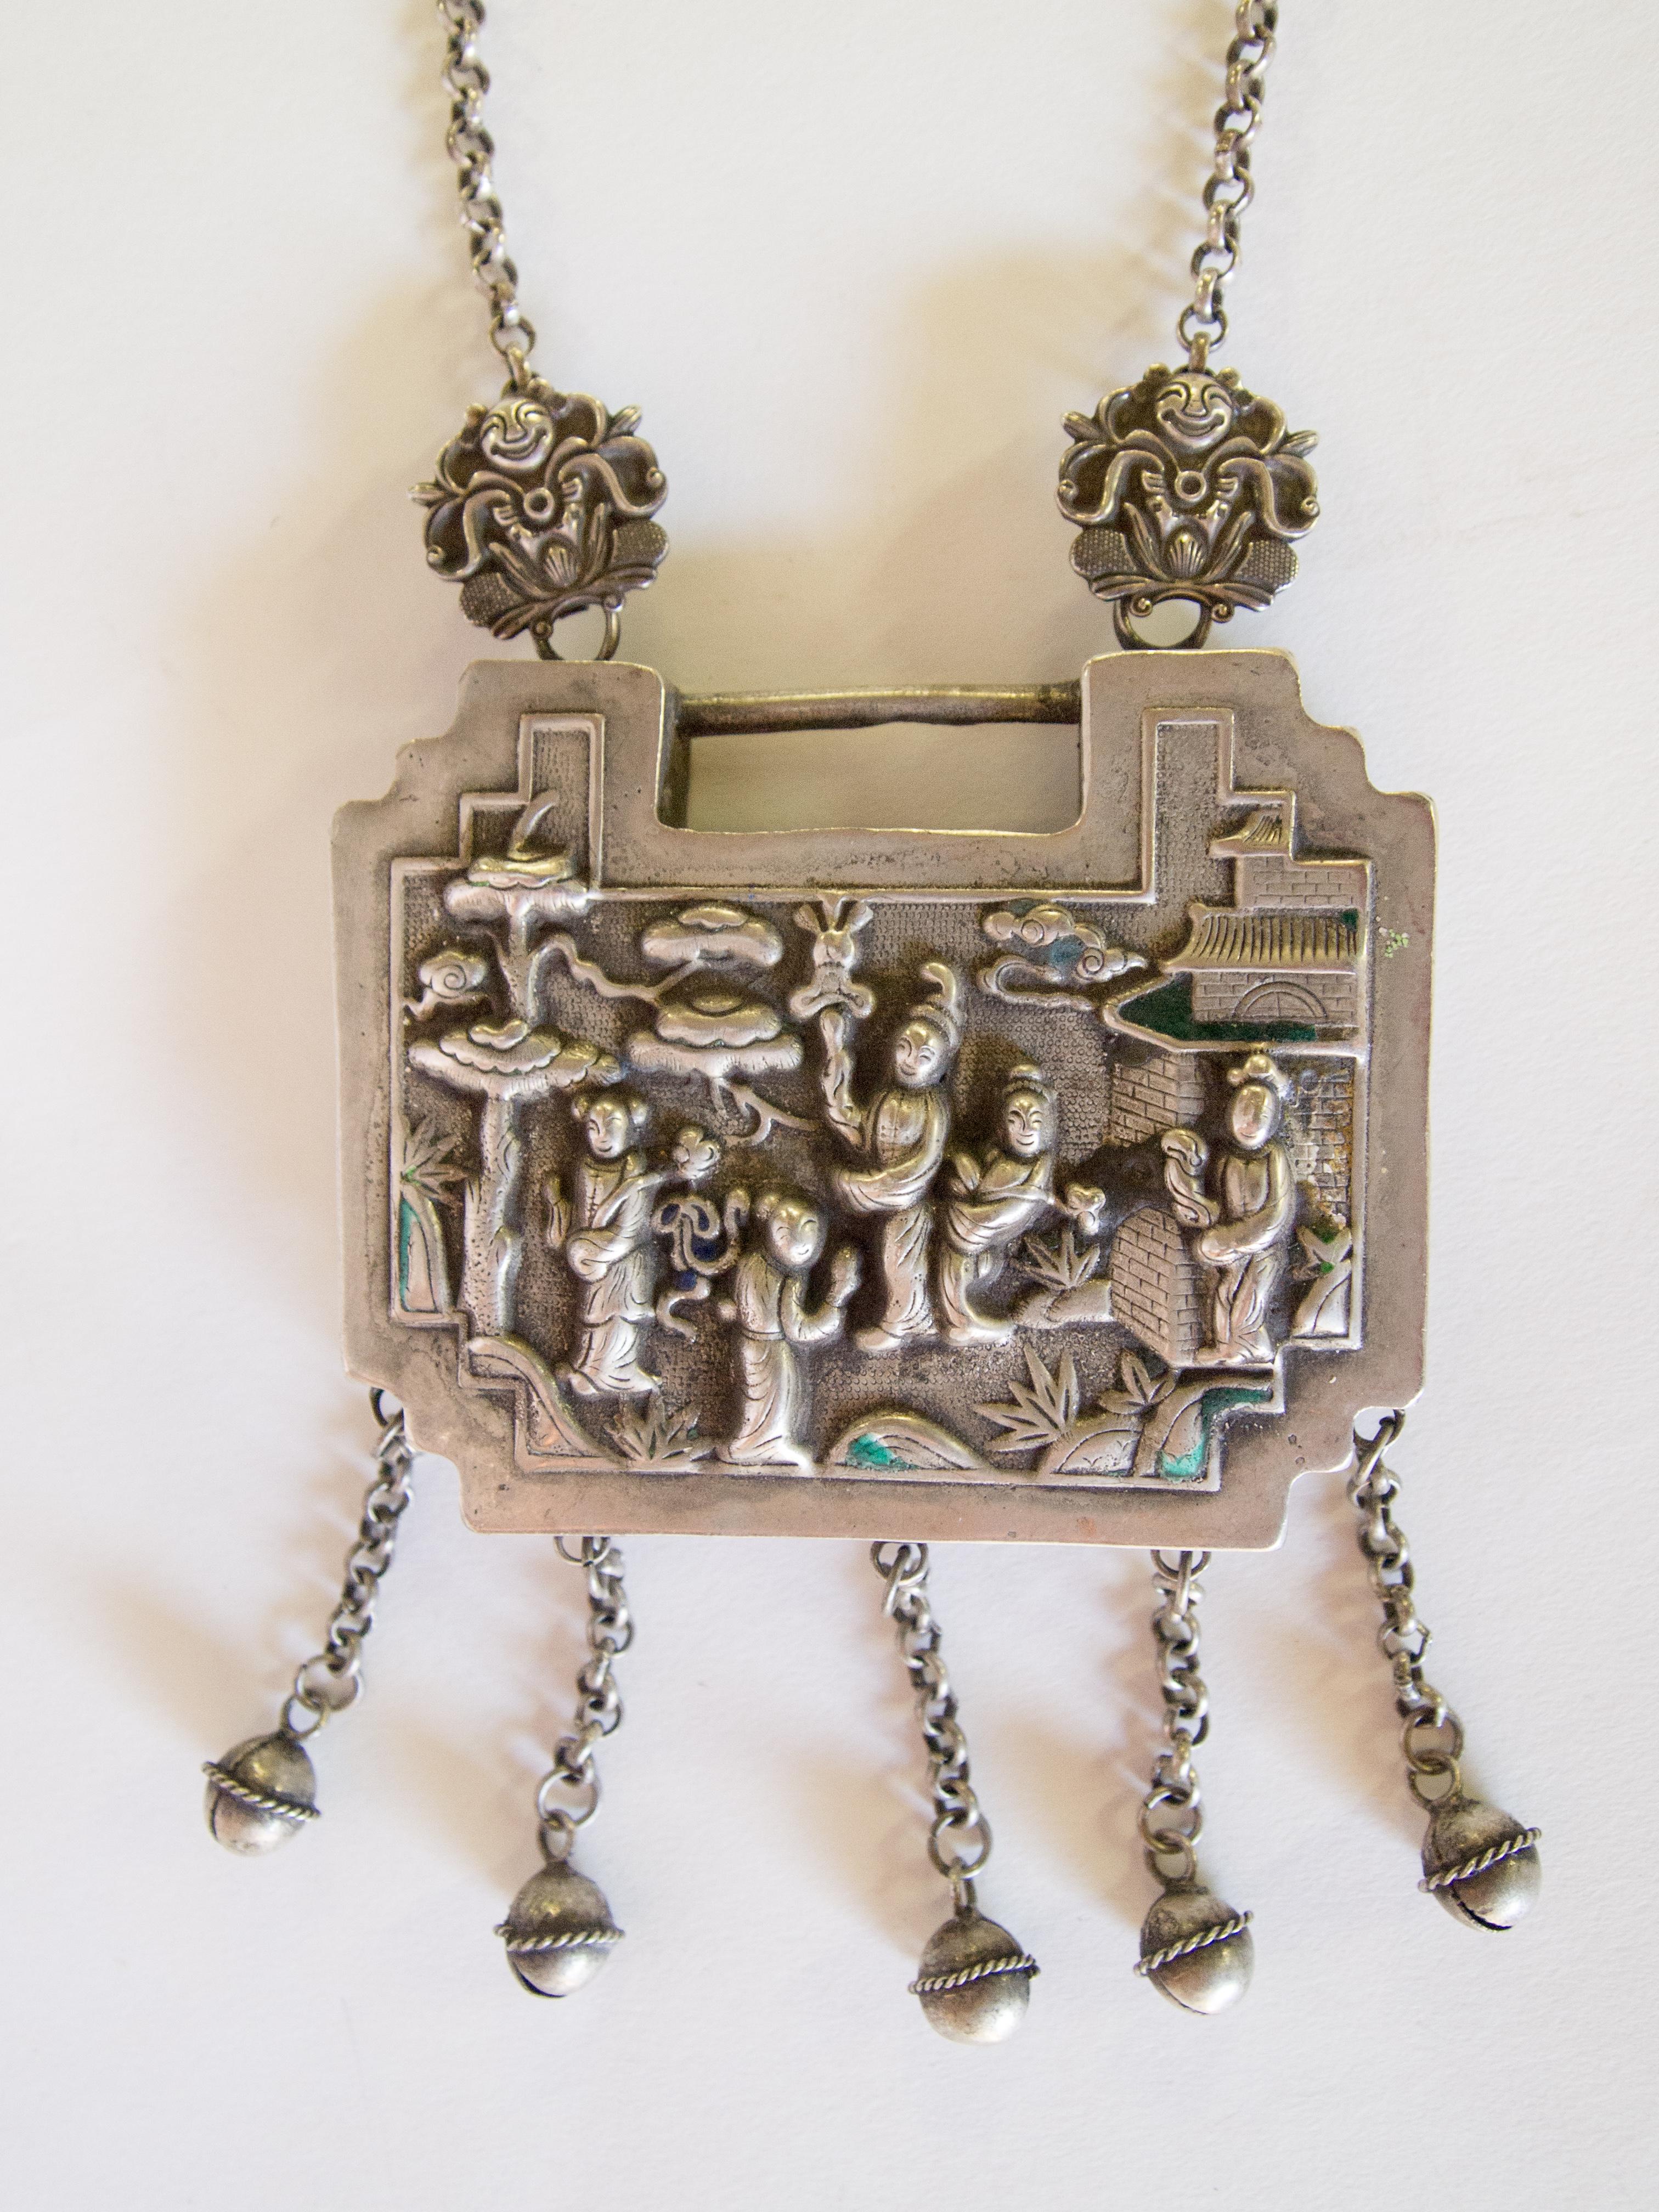 Hand-Crafted Child Amulet Lock, Silver Alloy, Yao or Hmong of SW China, Early 20th Century